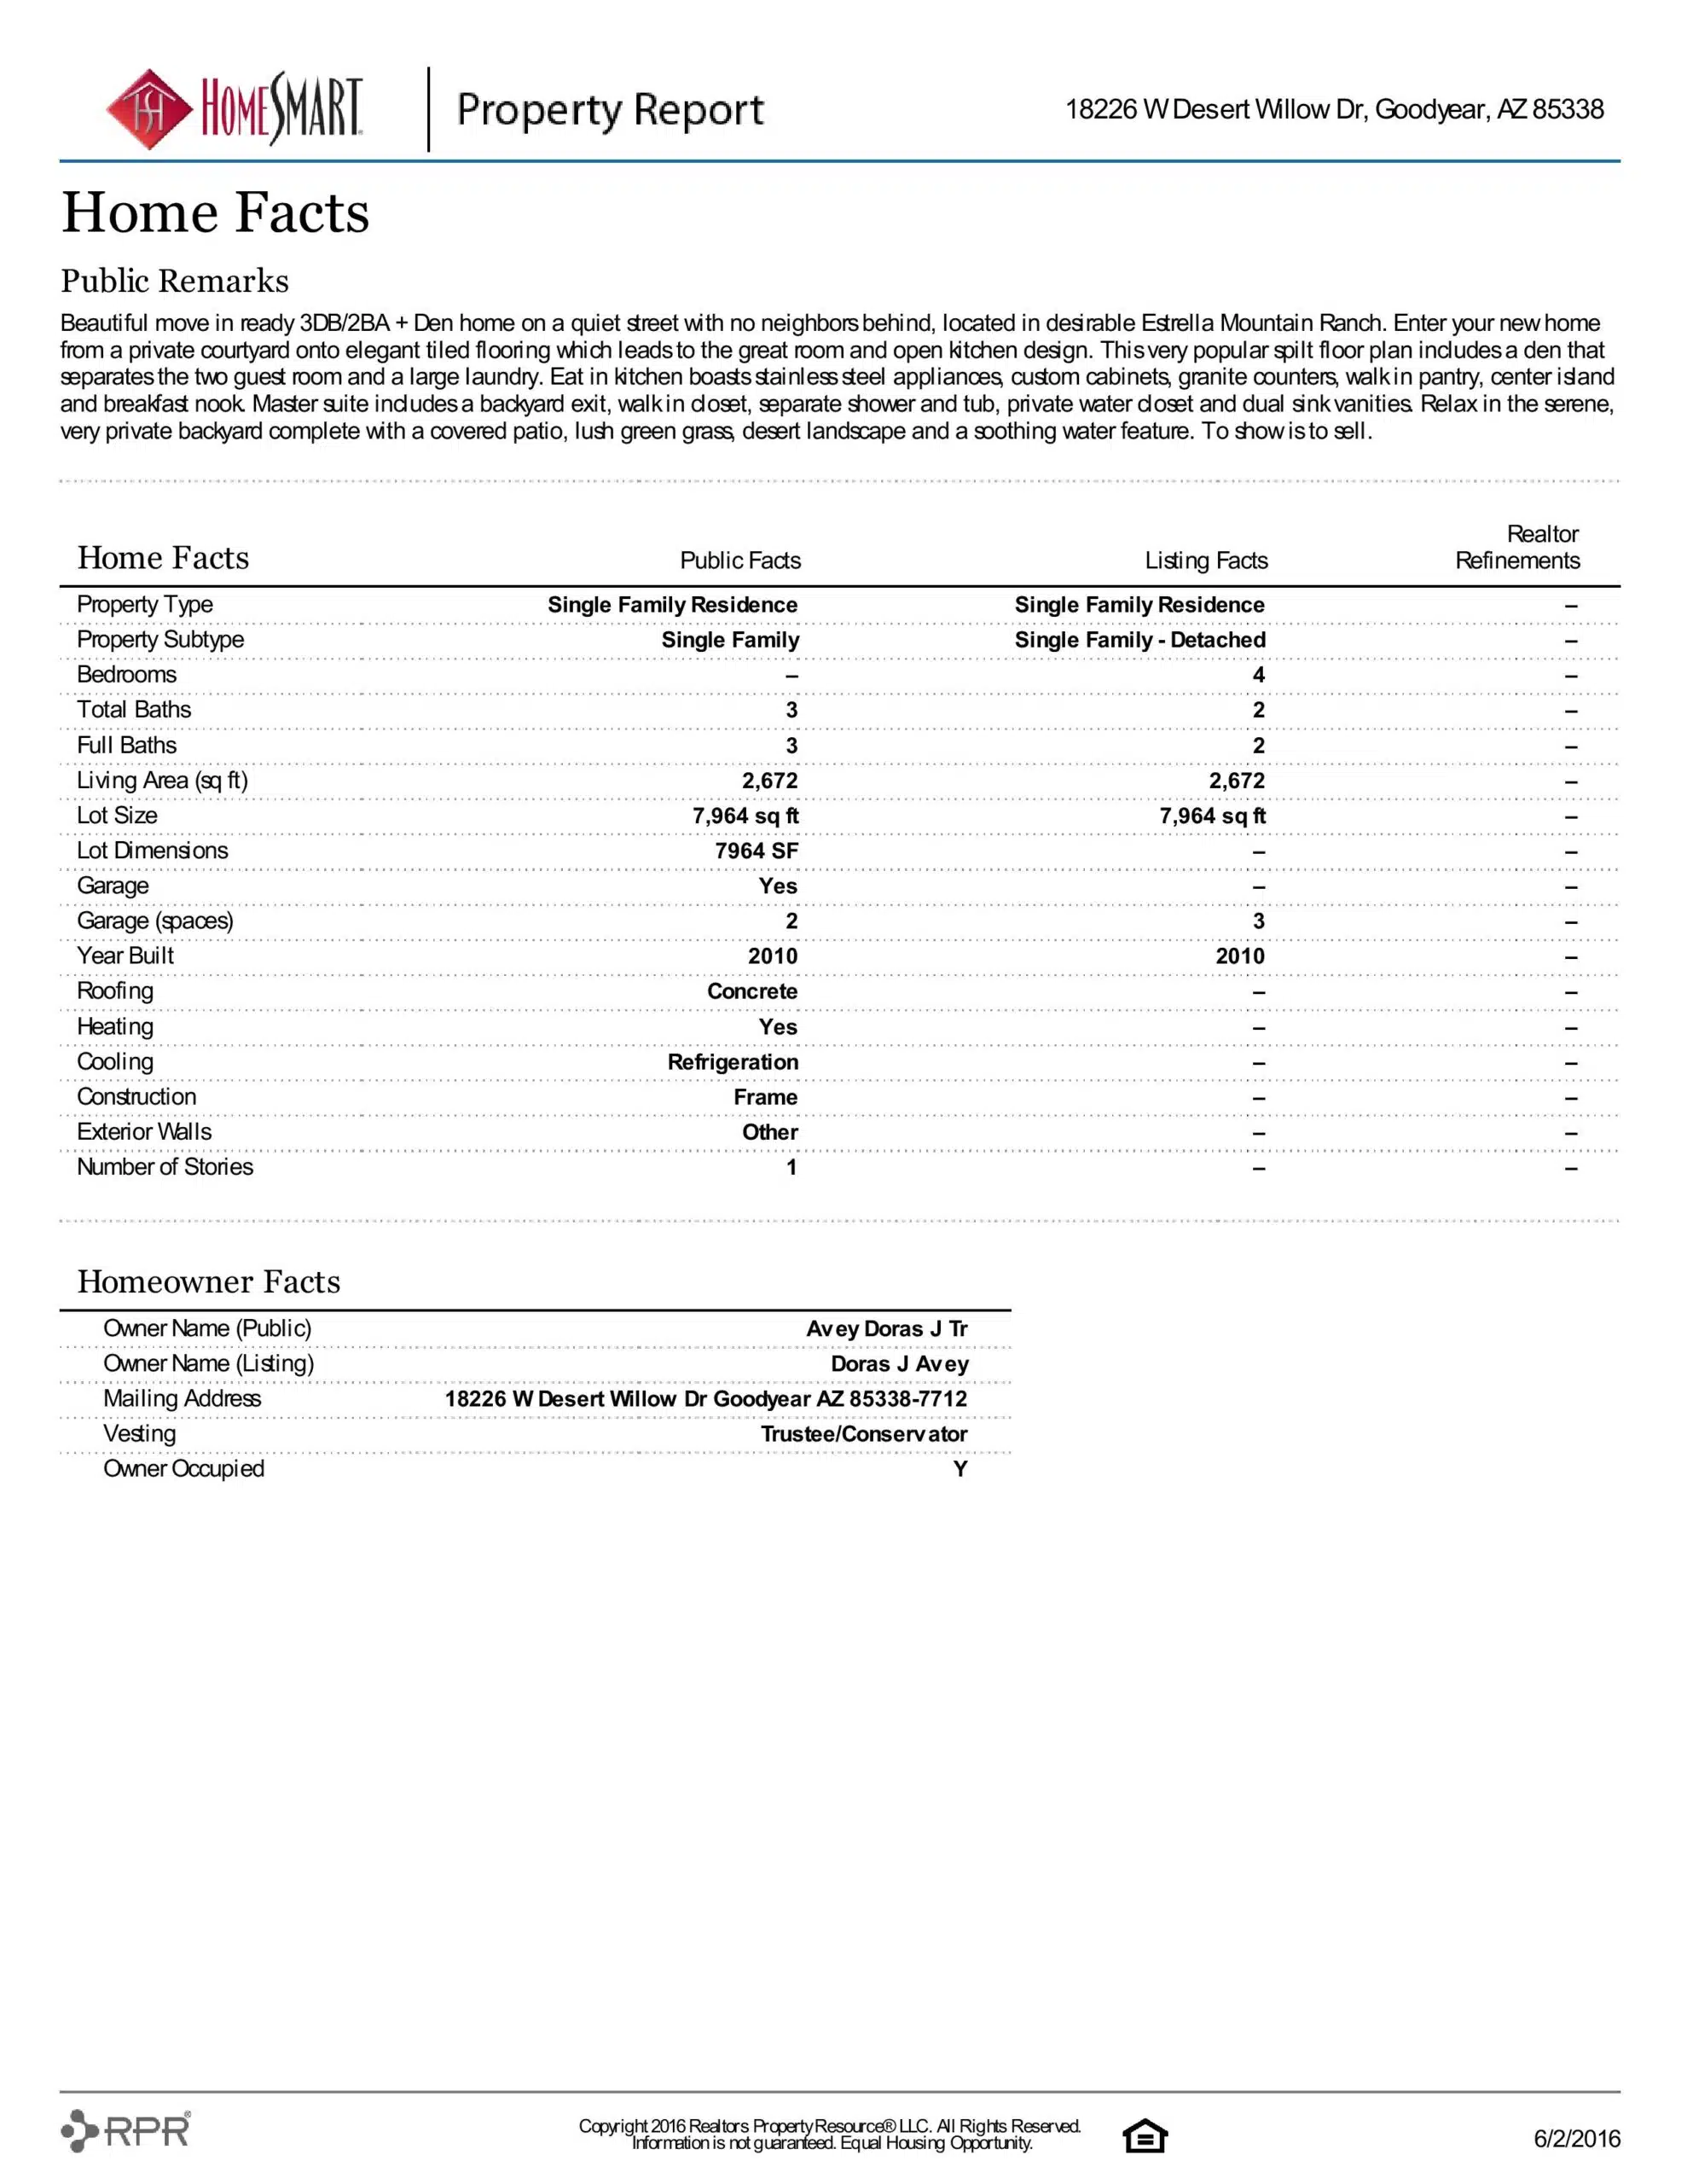 18226 W DESERT WILLOW DR PROPERTY REPORT-page-003